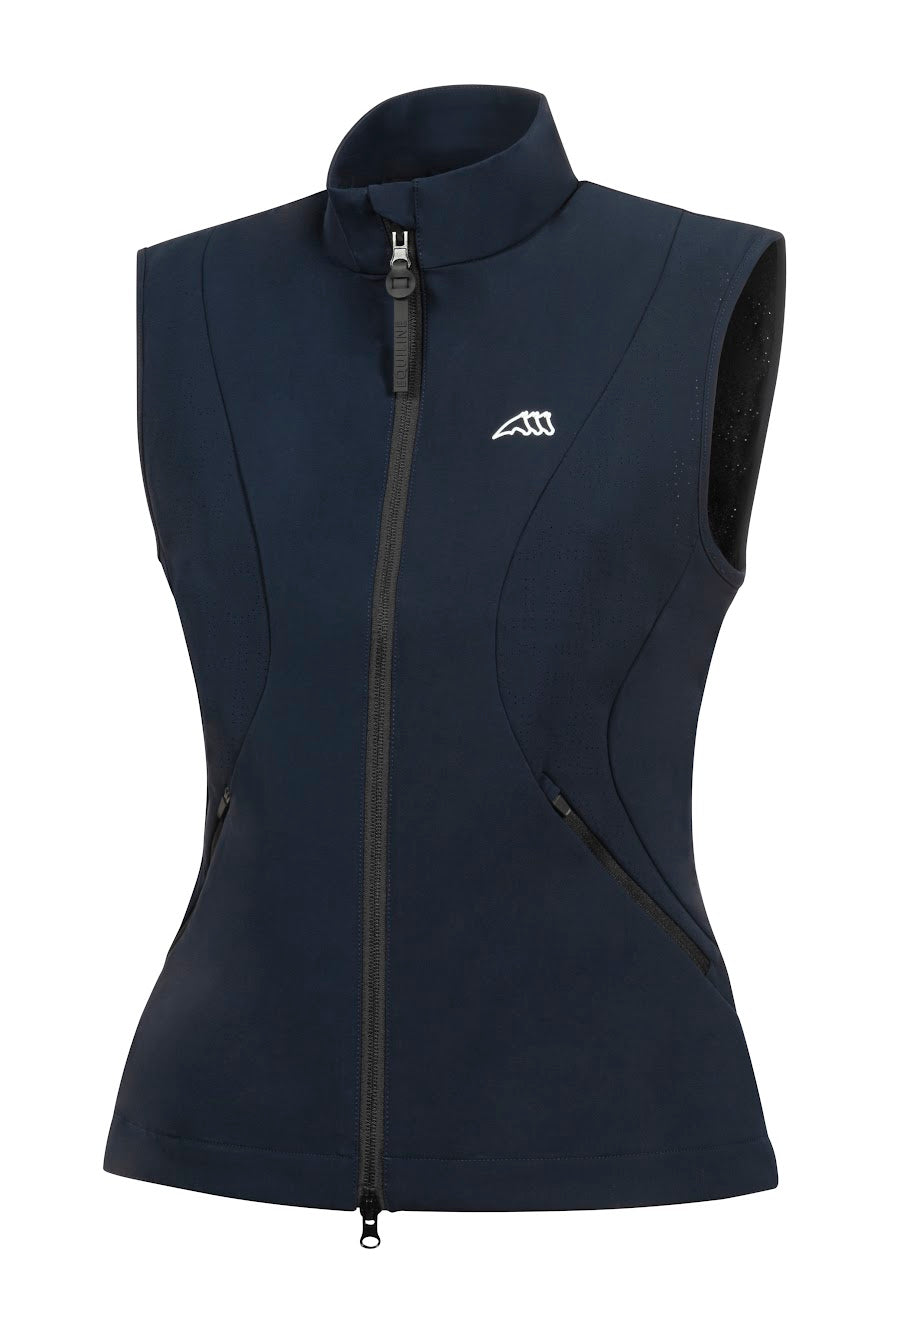 The Equiline Codiec Softshell Gilet. With perforated inserts down the side and top of the back for breathability. The perforation on the back is in Equiline text. Finished with a small white equiline logo and two zip fastened pockets.  Available in Navy.  Pr09796